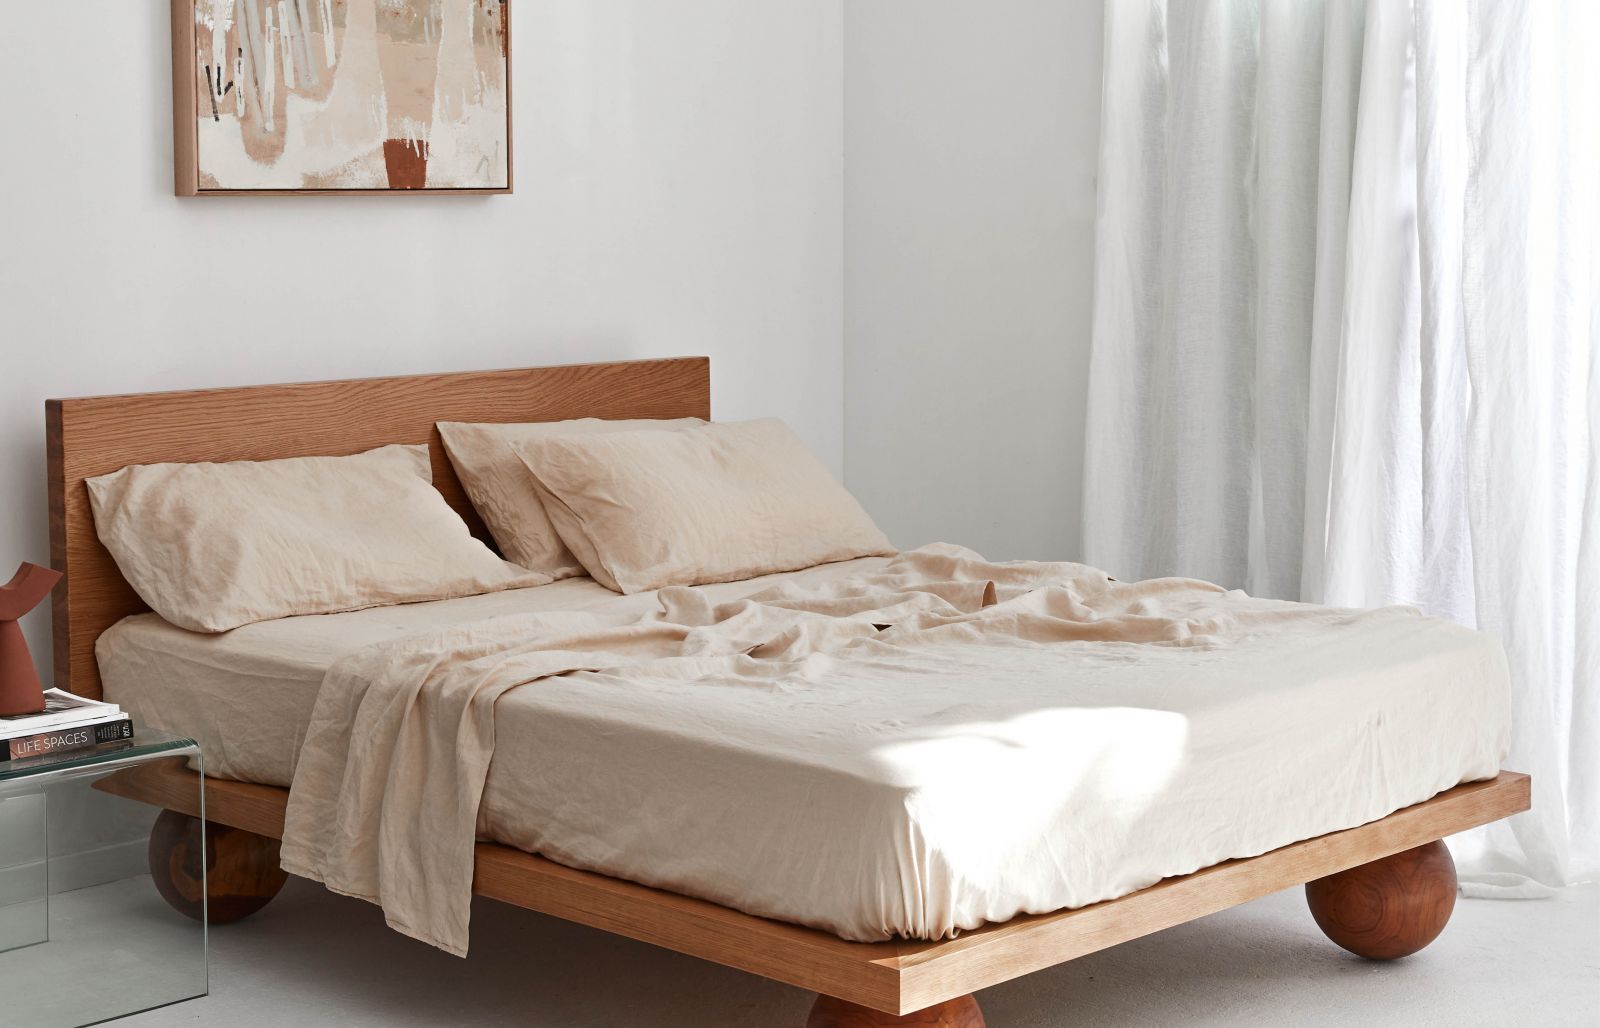 French linen, lookbook, creme, bedding